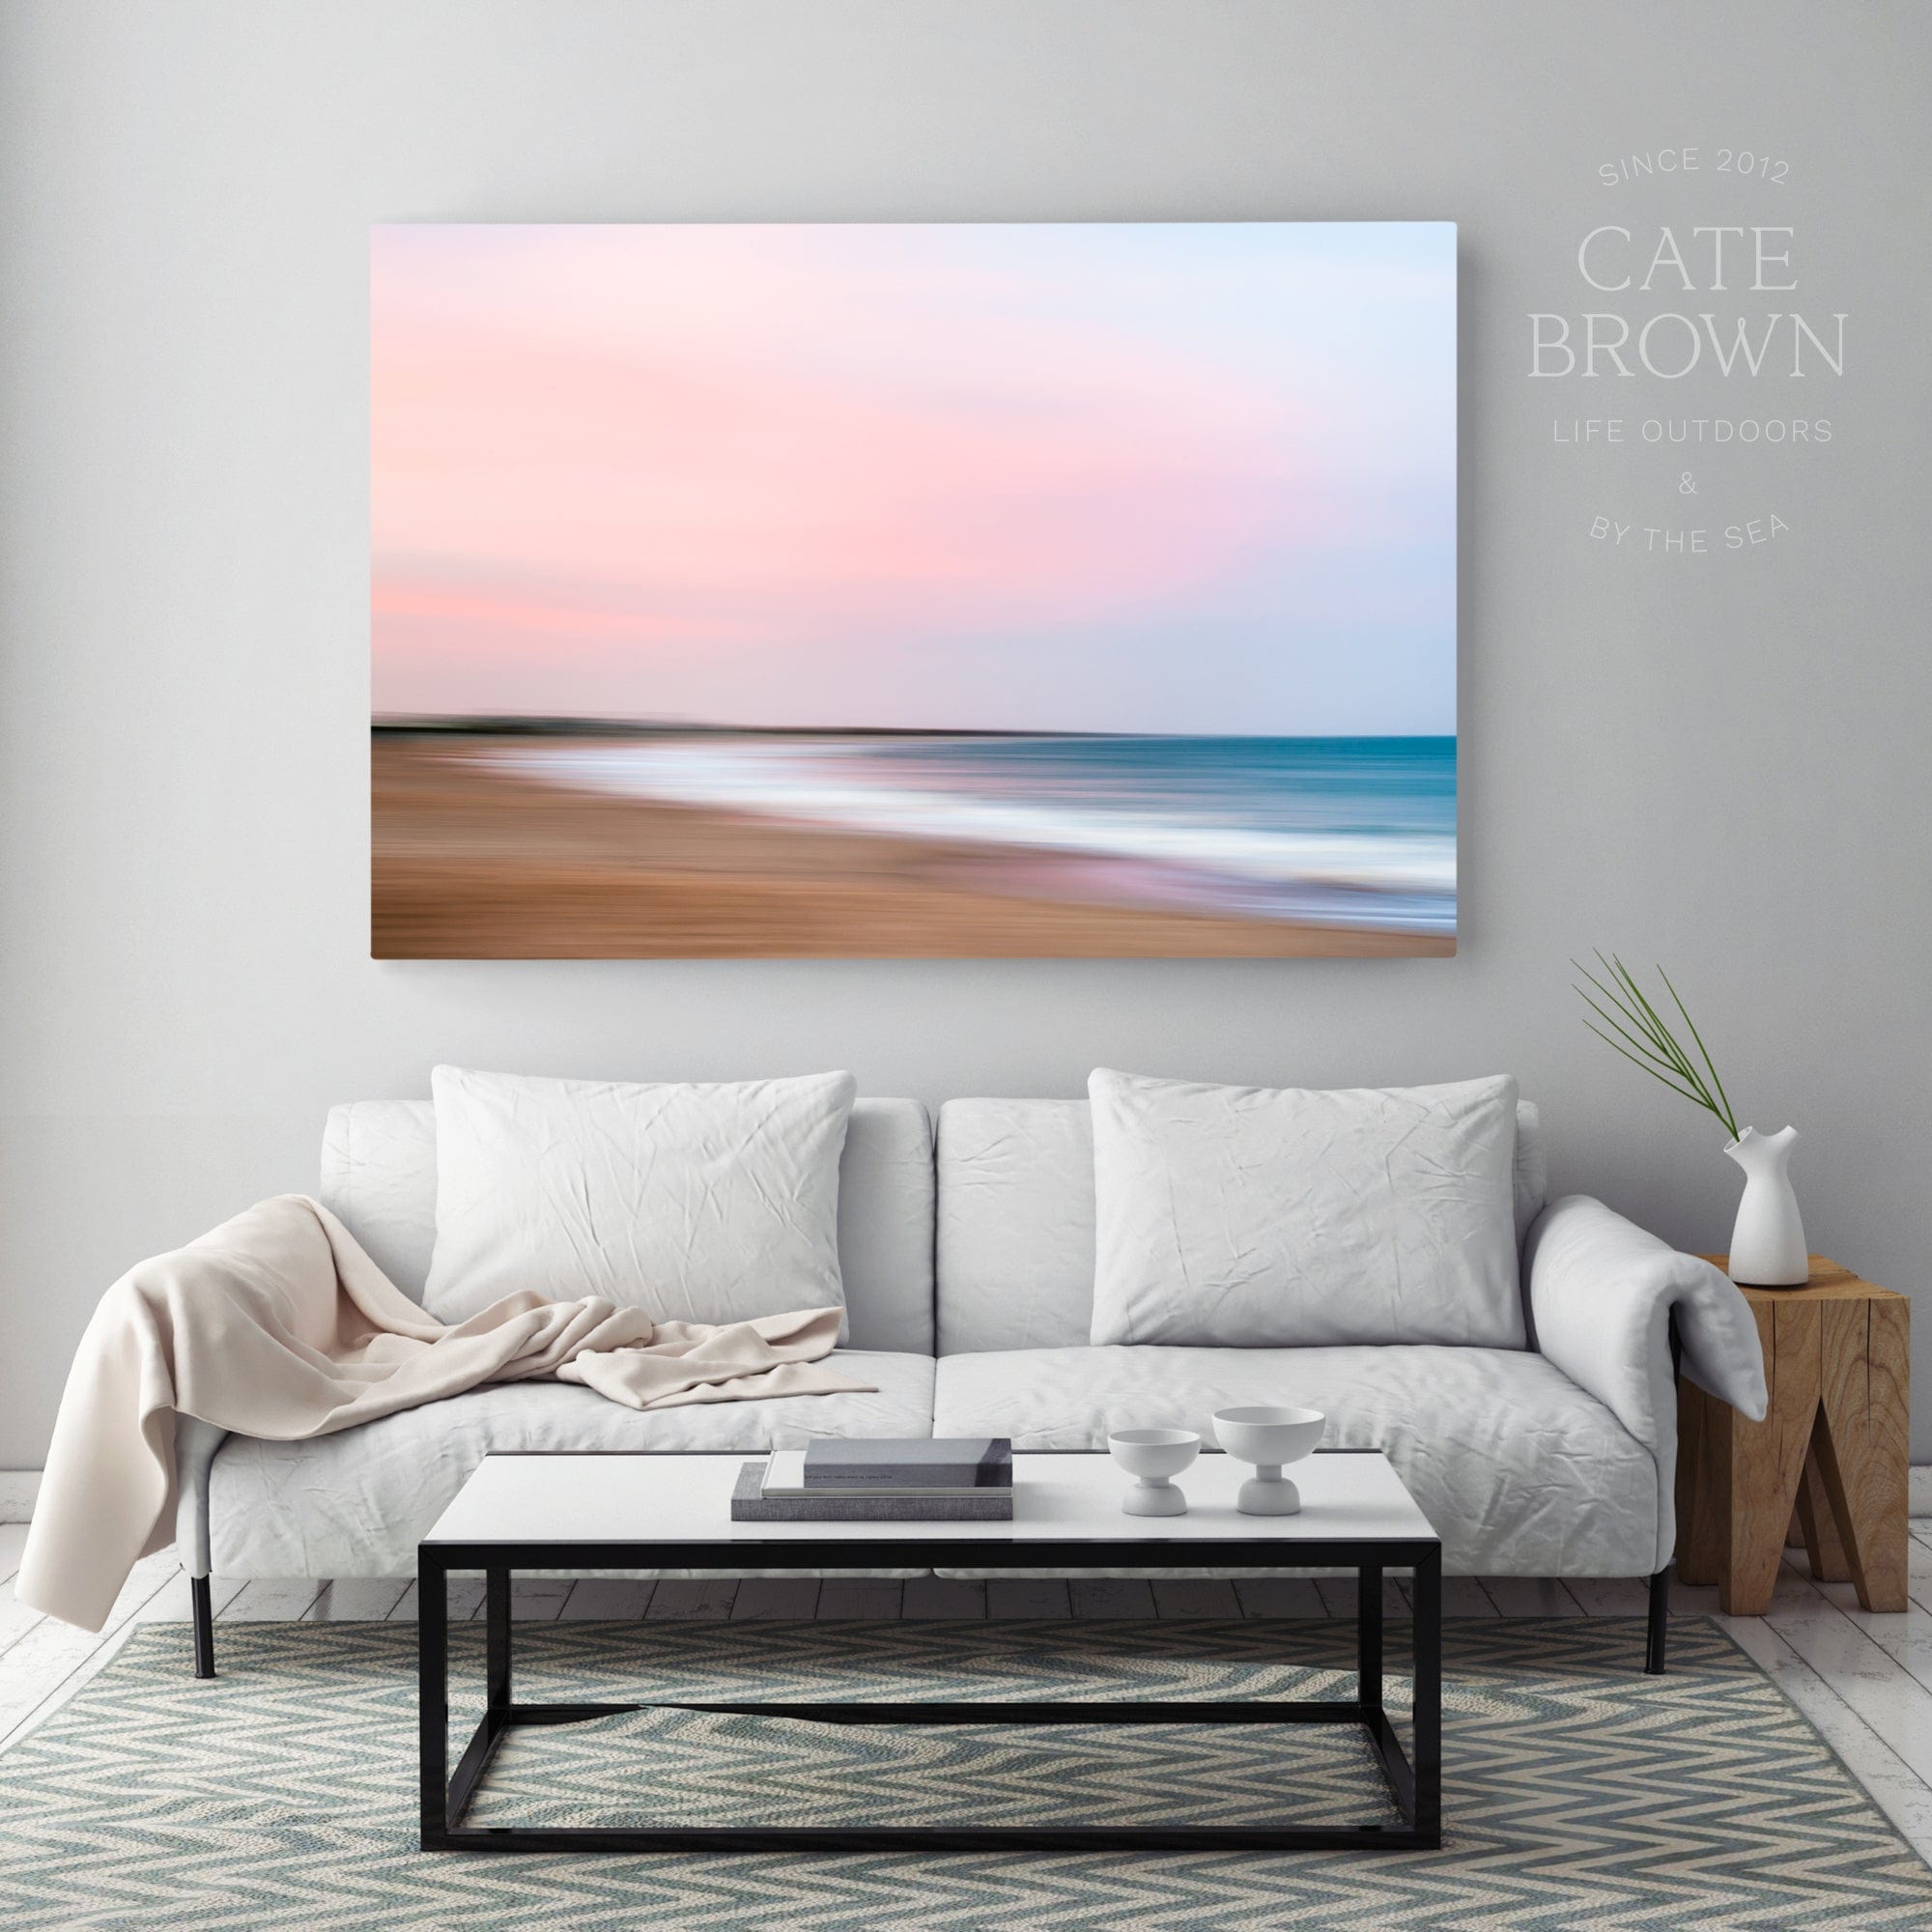 Cate Brown Photo Canvas / 16"x24" / None (Print Only) Qeba #3  //  Abstract Photography Made to Order Ocean Fine Art